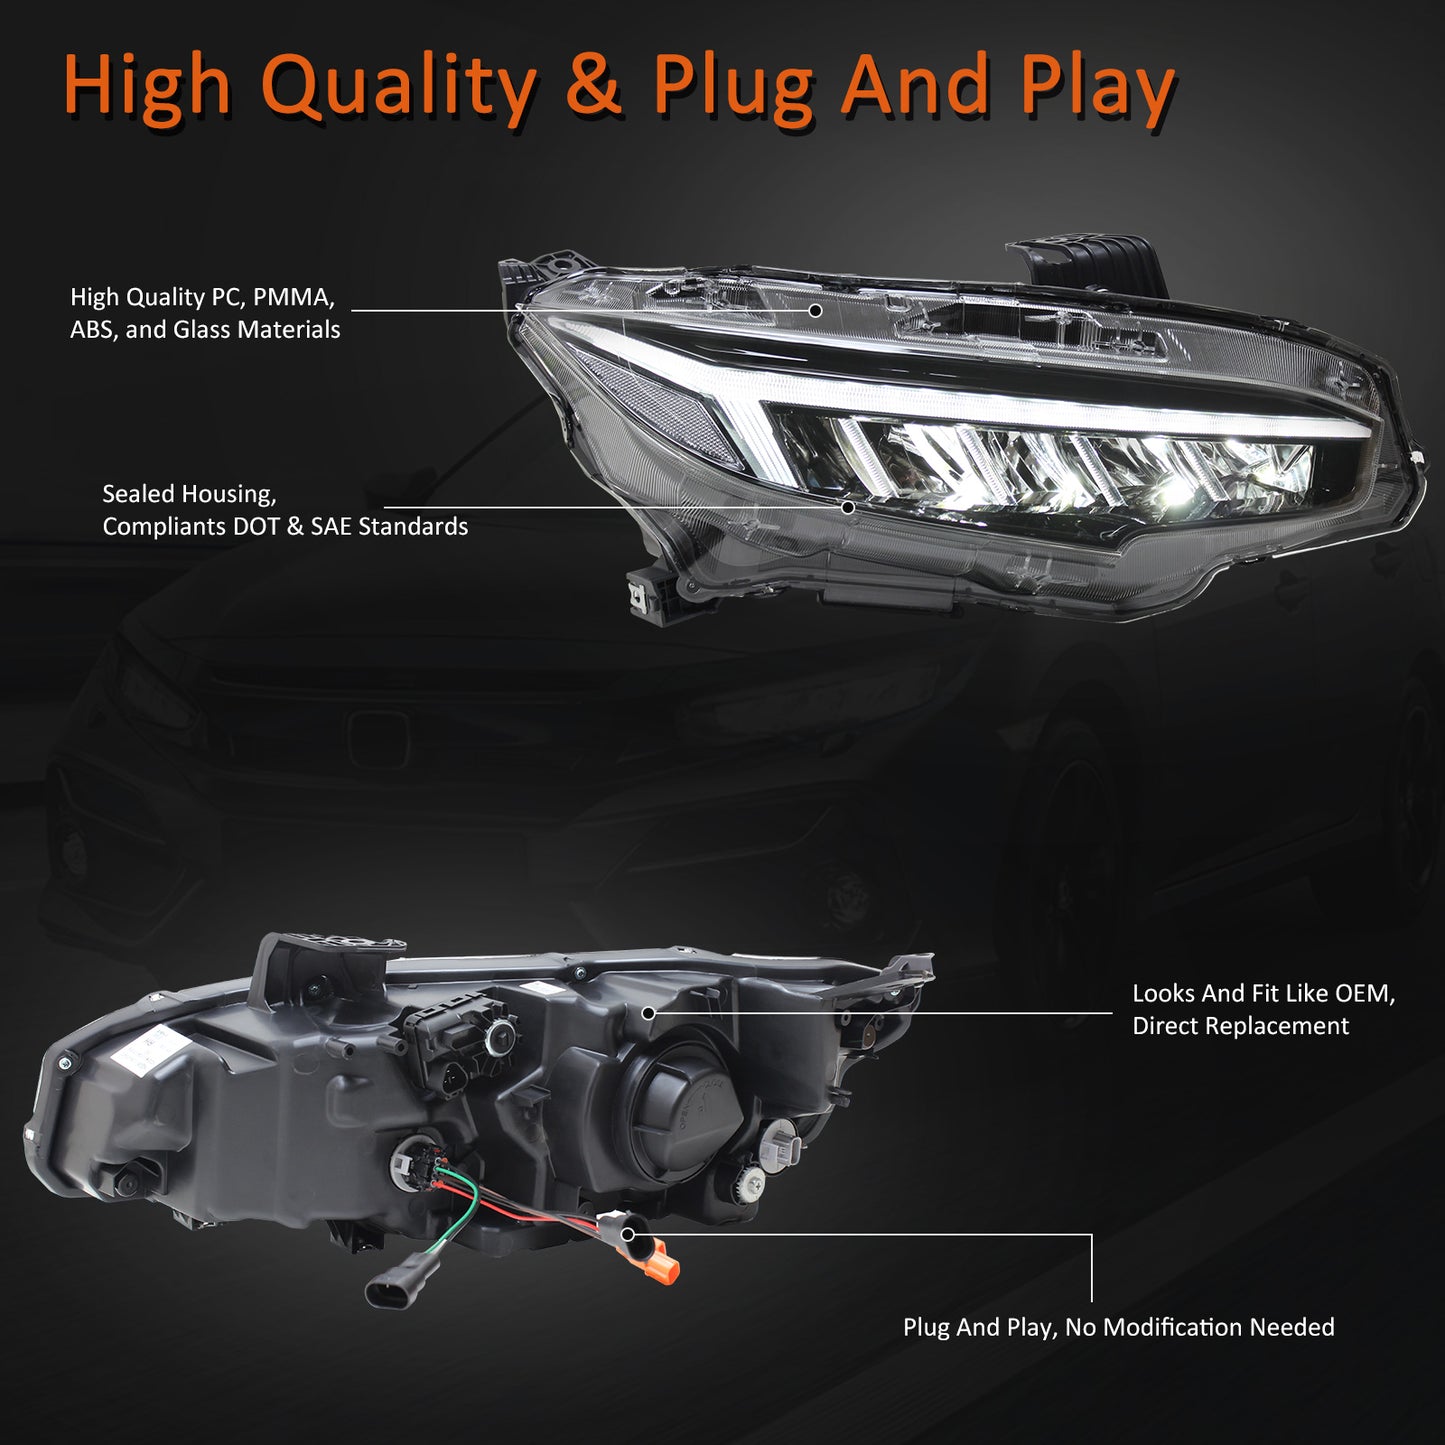 JOLUNG Full LED Headlights Assembly For 10th Gen Honda Civic EX/ LX/ Sport/ Touring/ Si/ Type R 2016-2021